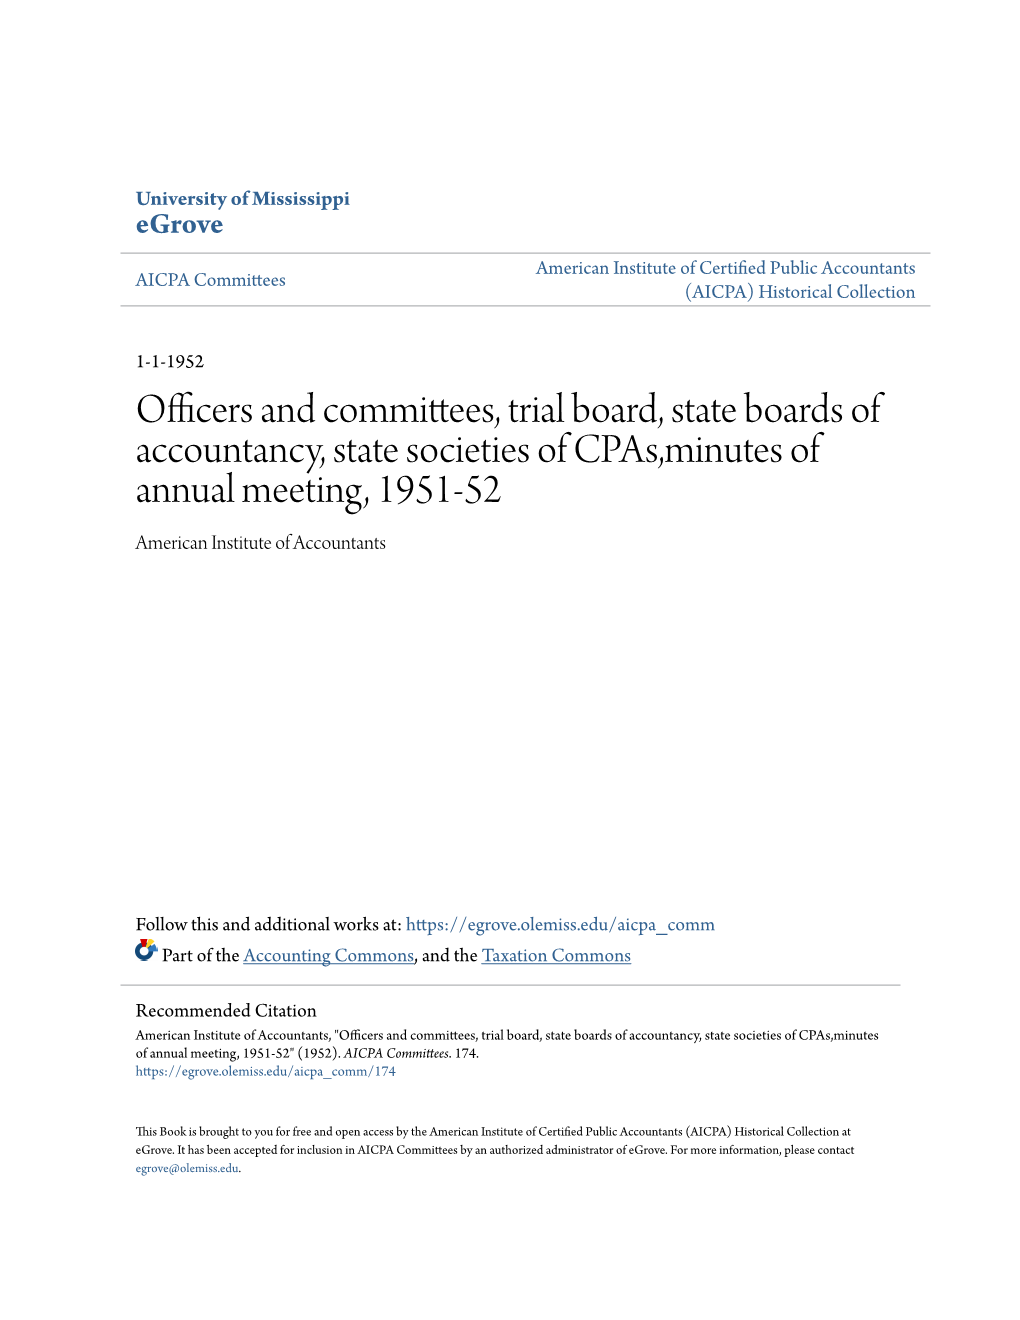 Officers and Committees, Trial Board, State Boards of Accountancy, State Societies of Cpas,Minutes of Annual Meeting, 1951-52 American Institute of Accountants